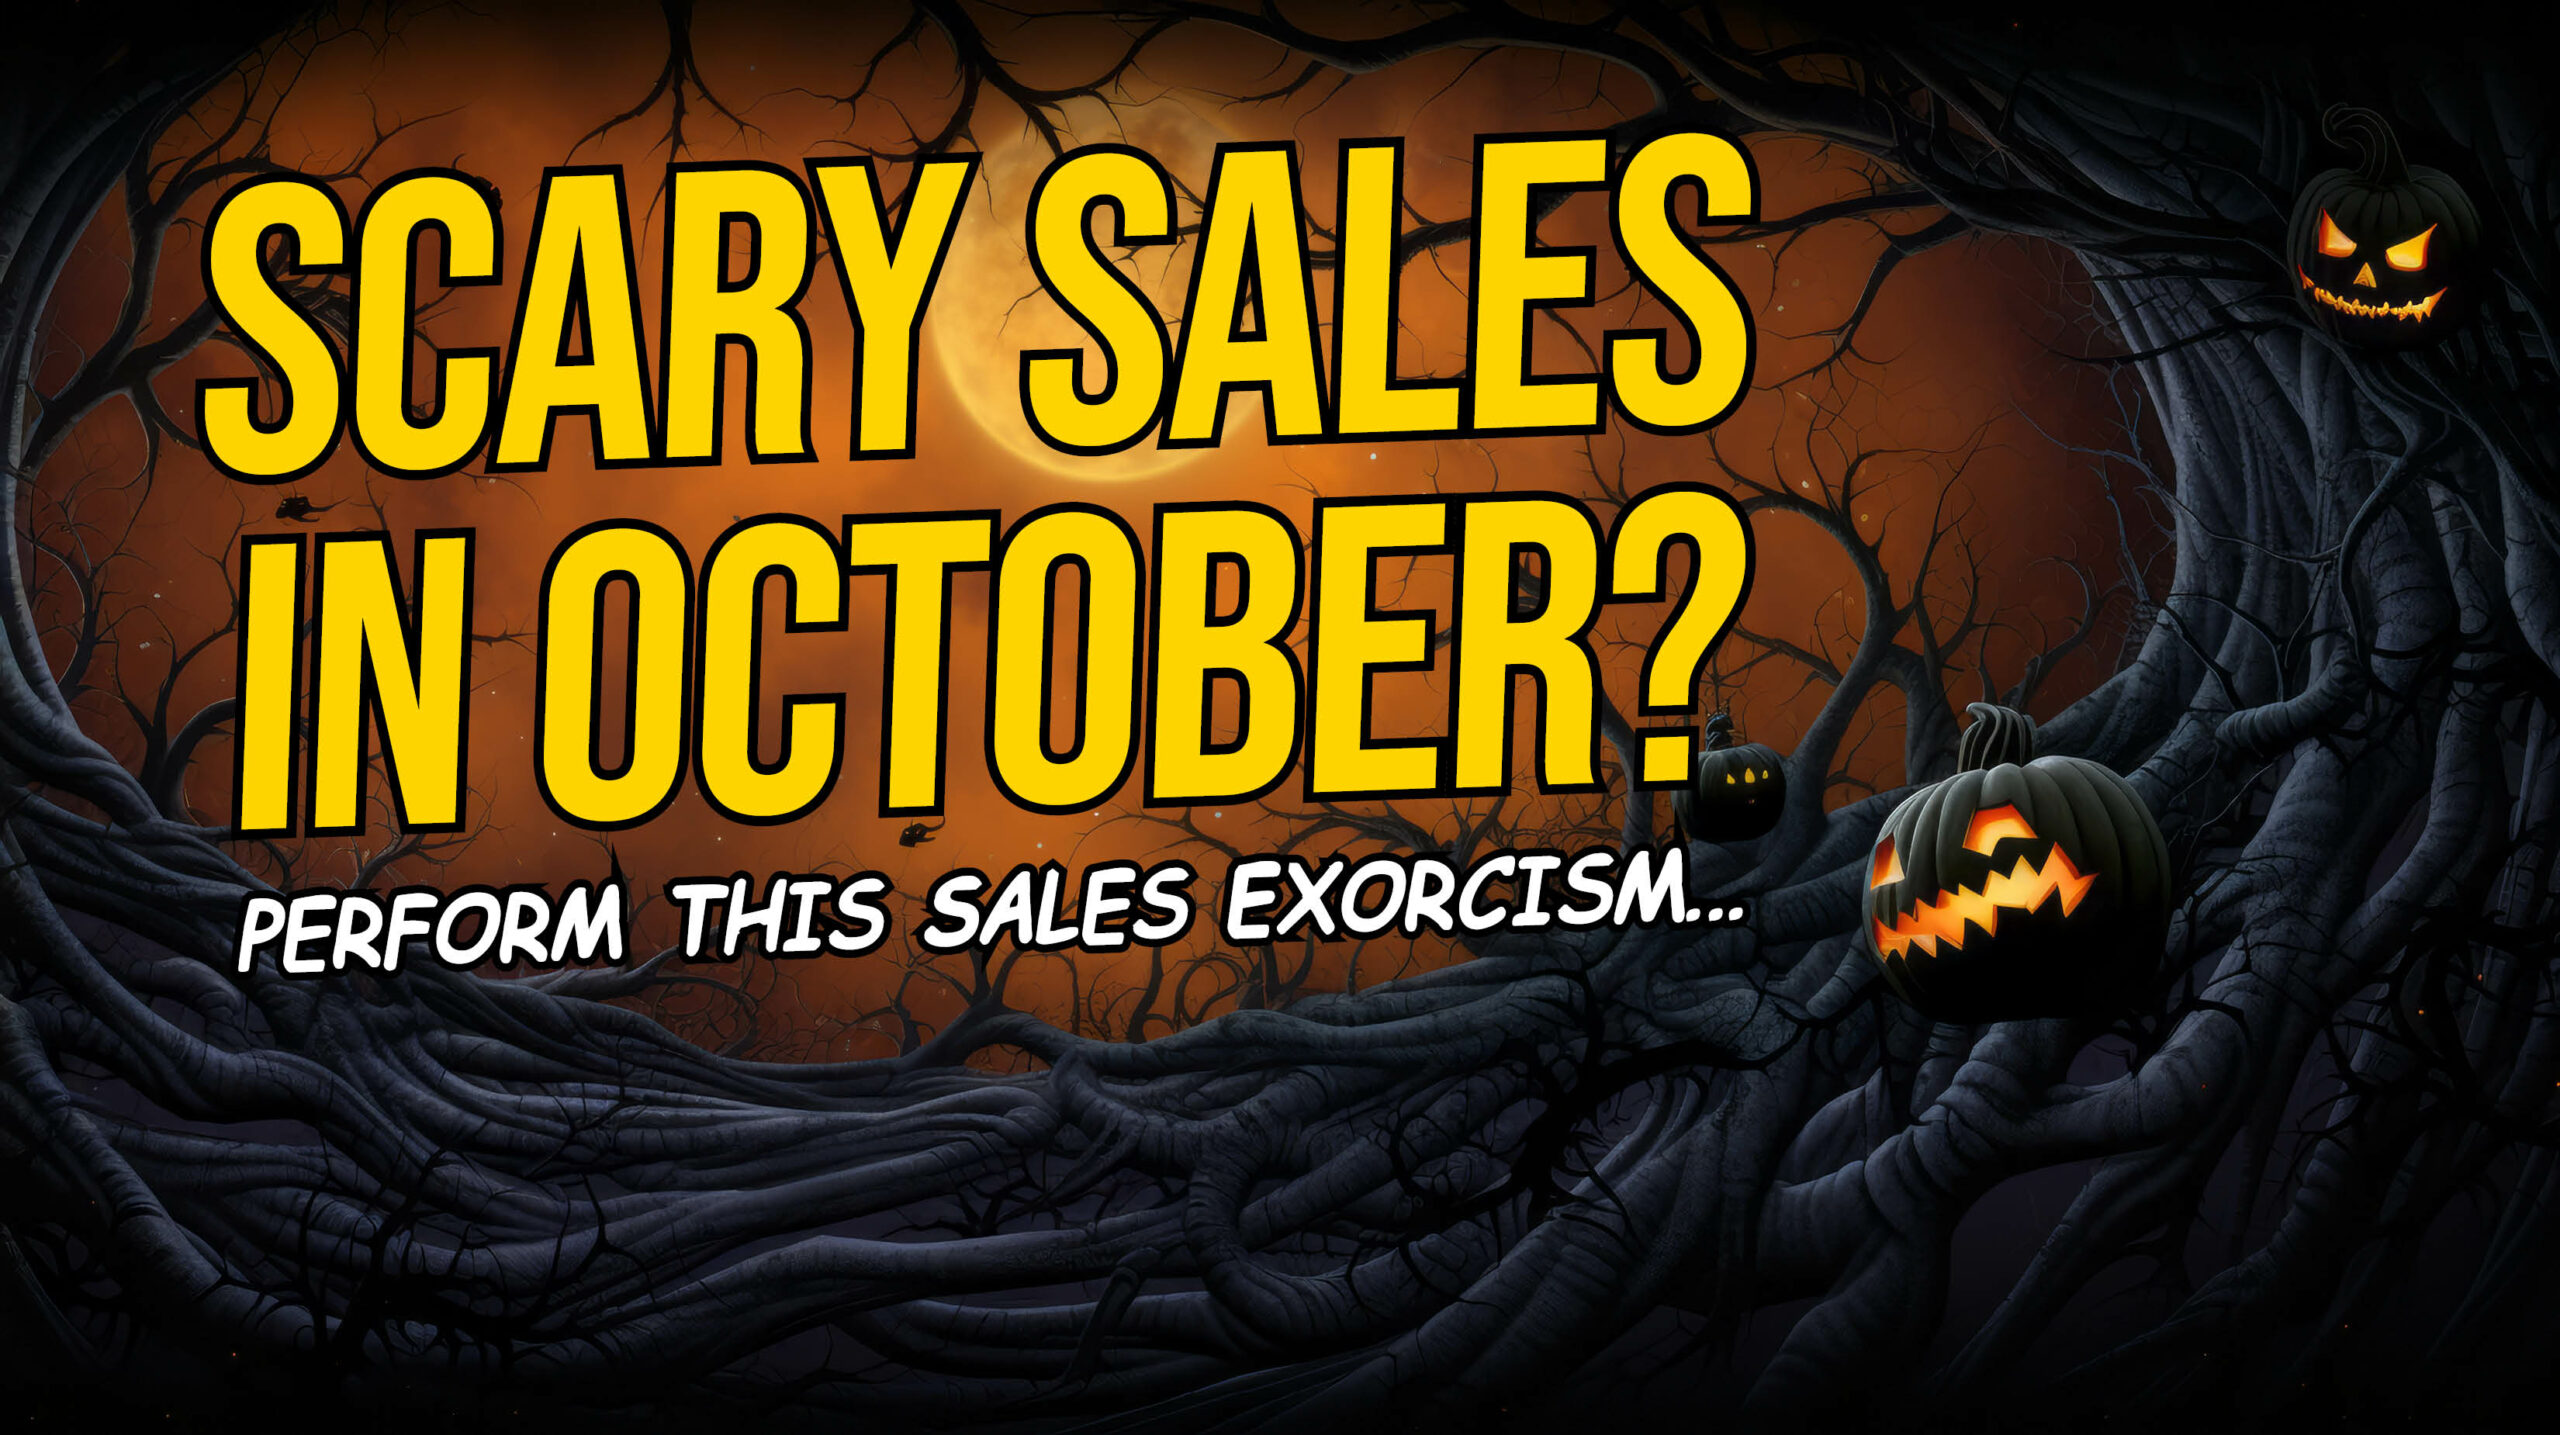 Scary Sales In October? Perform This Sales Exorcism…